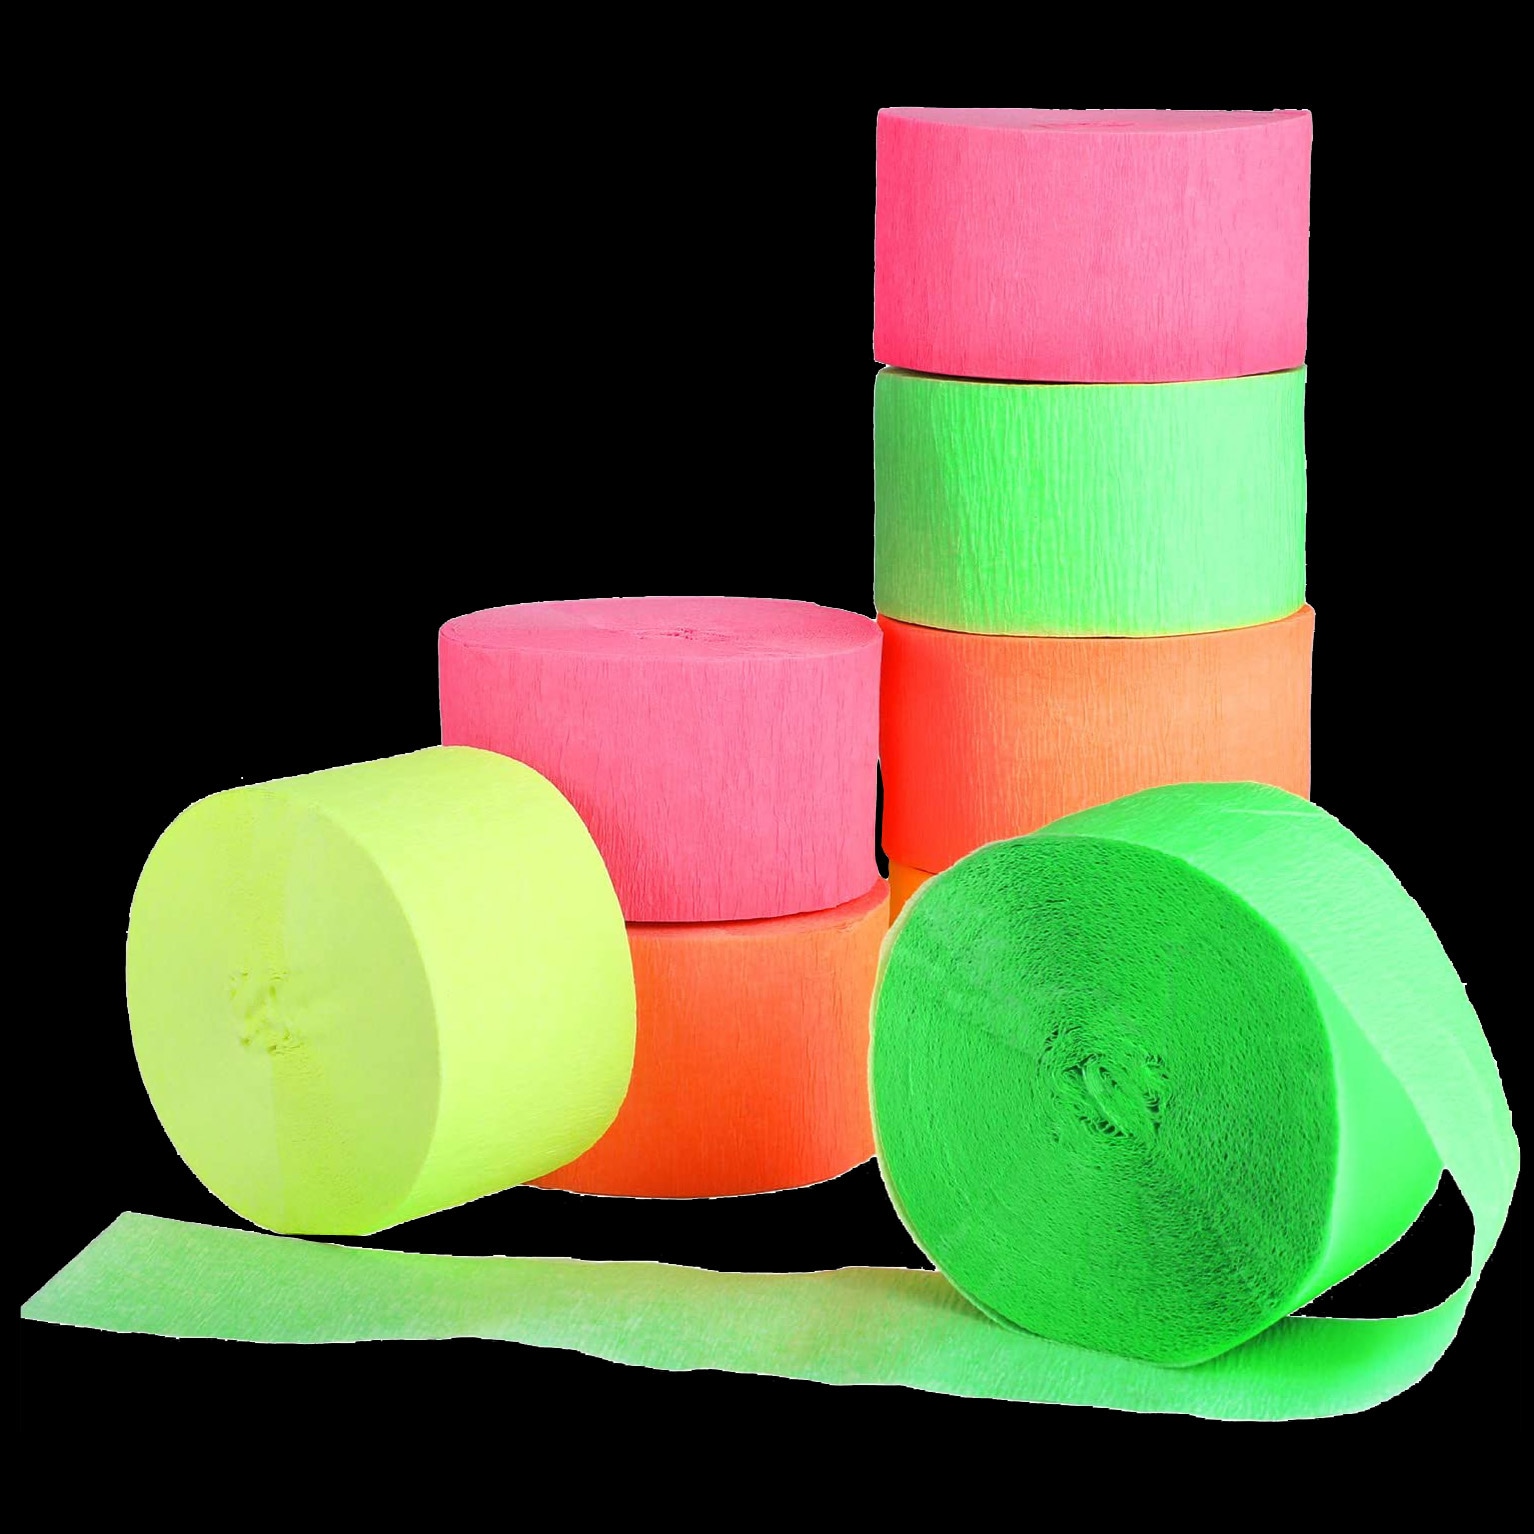 Crepe Paper Streamers 4 Rolls 72ft in 4 Colors for Party